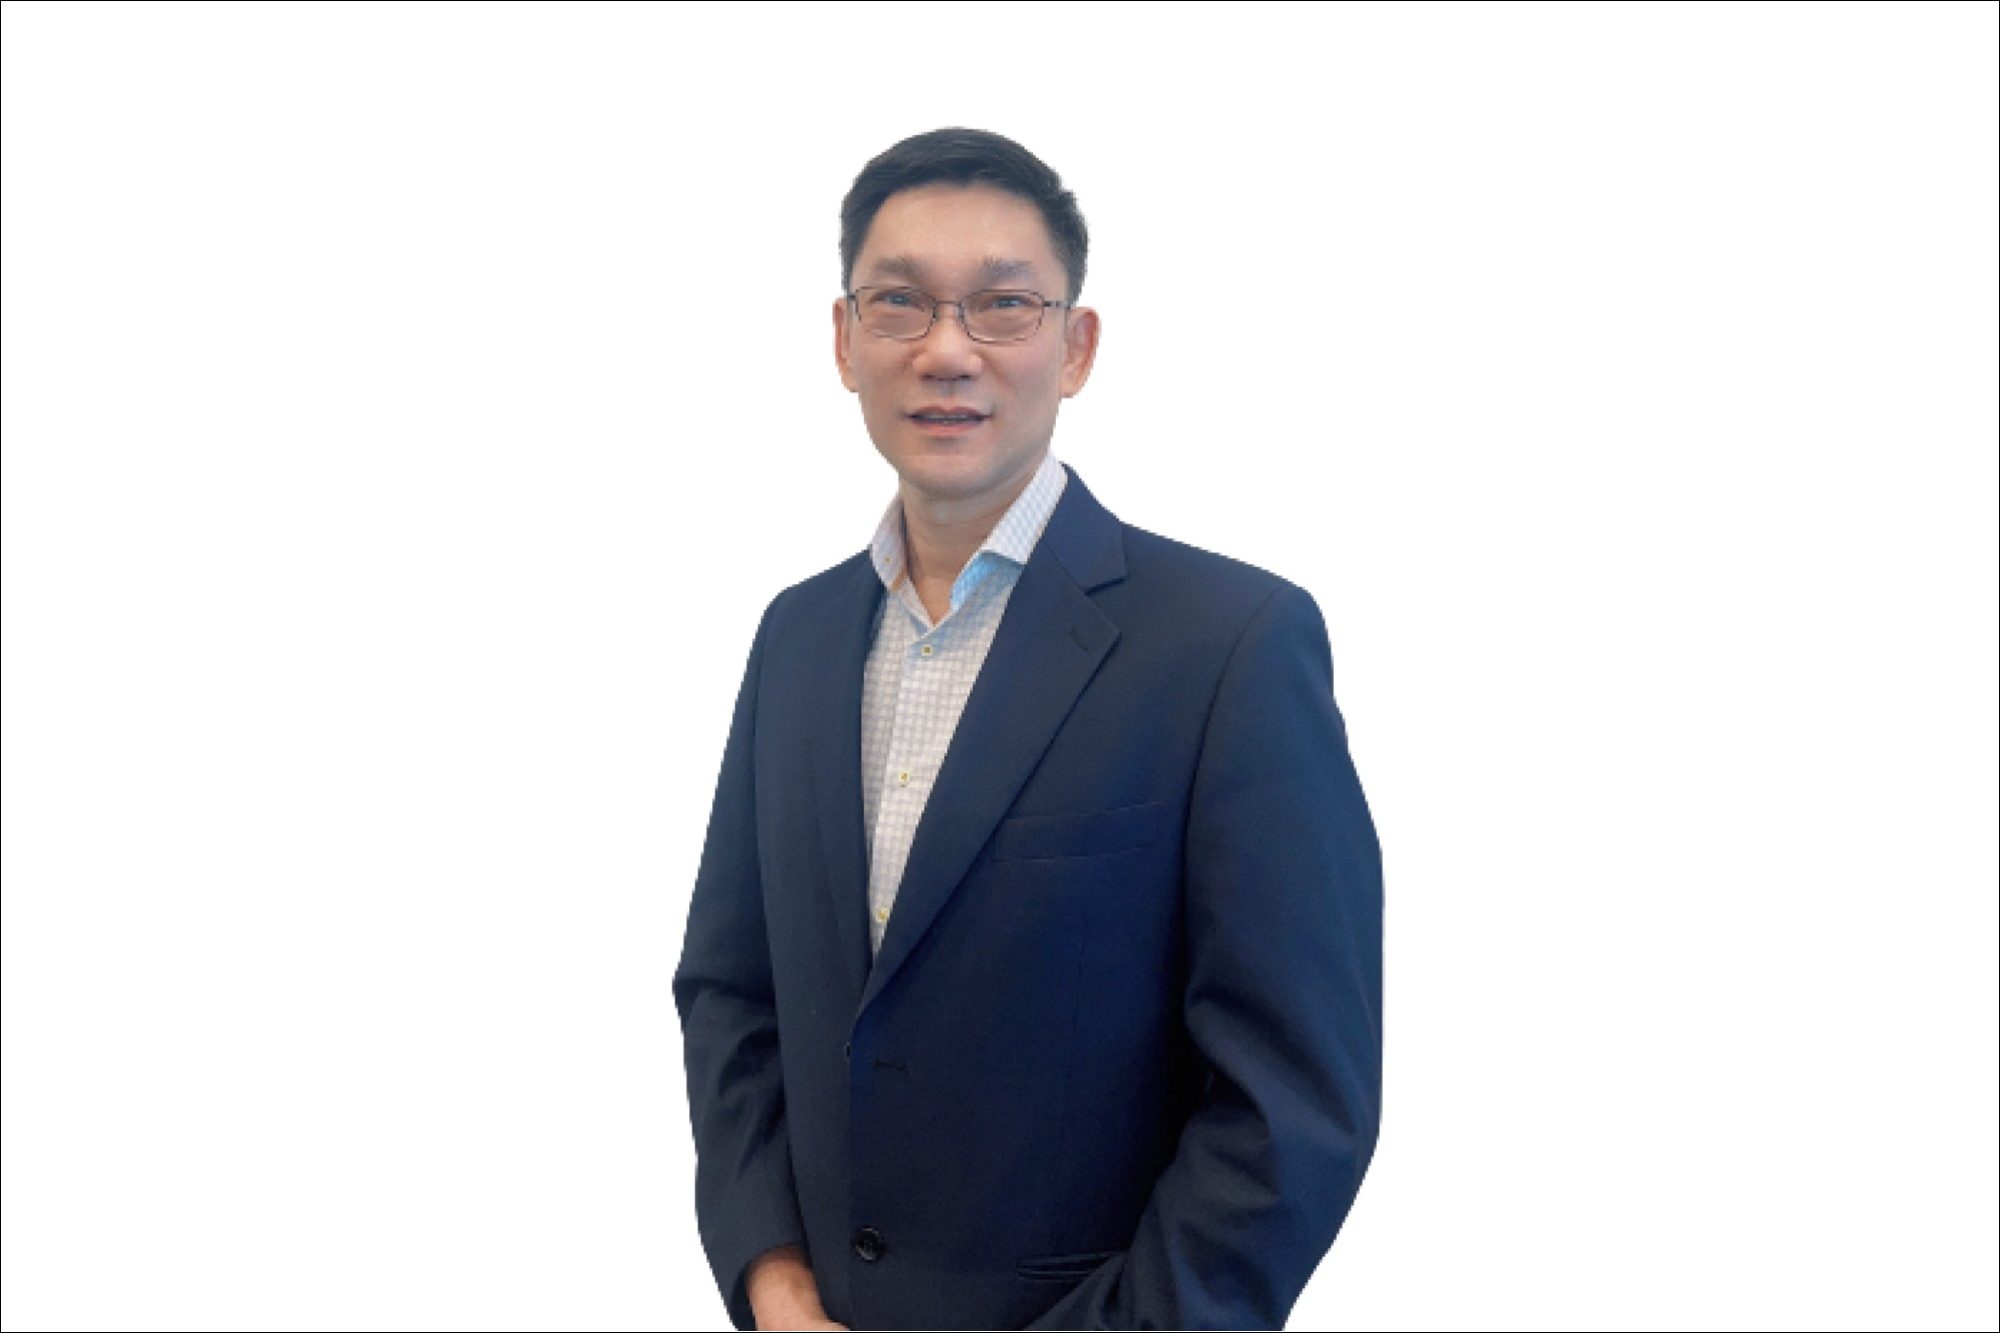 Trimble Inc. (NASDAQ: TRMB) has announced the appointment of Thomas Phang as the new Vice President of Sales for Trimble Construction, overseeing the Asia Pacific region.